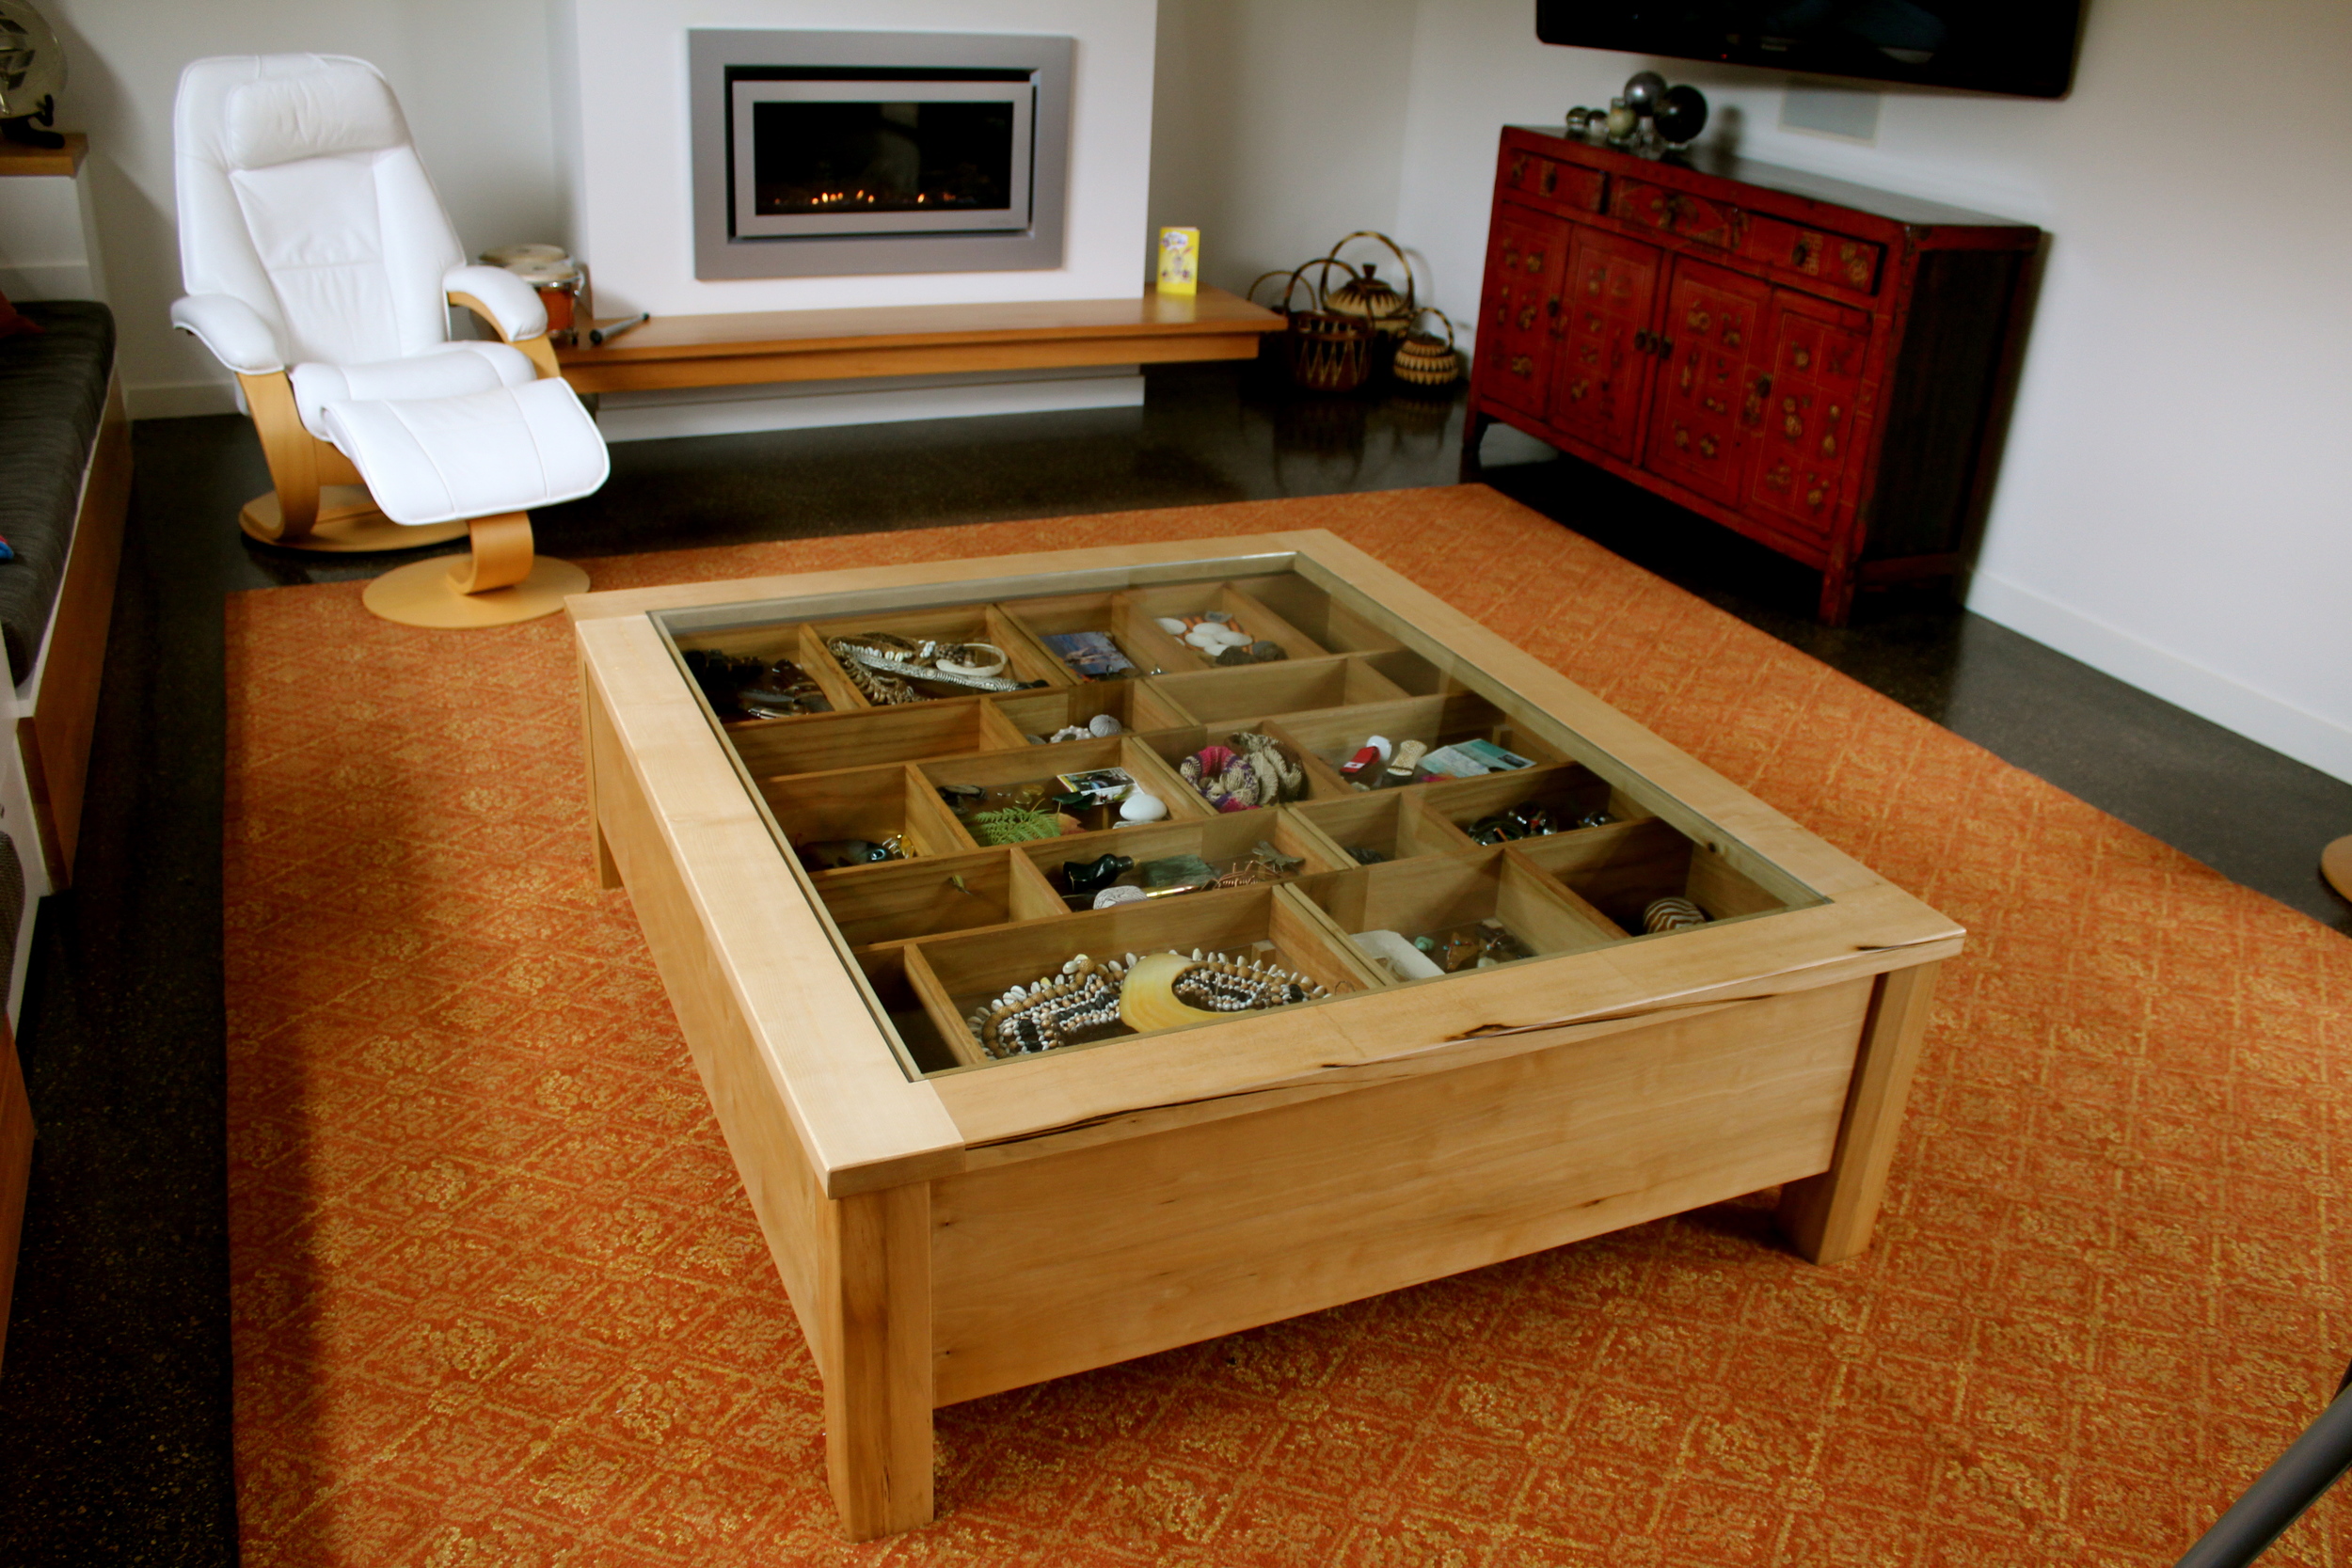 Amazing Sassafras Coffee Table with Memento Compartment. A truly stunning, bespoke piece.